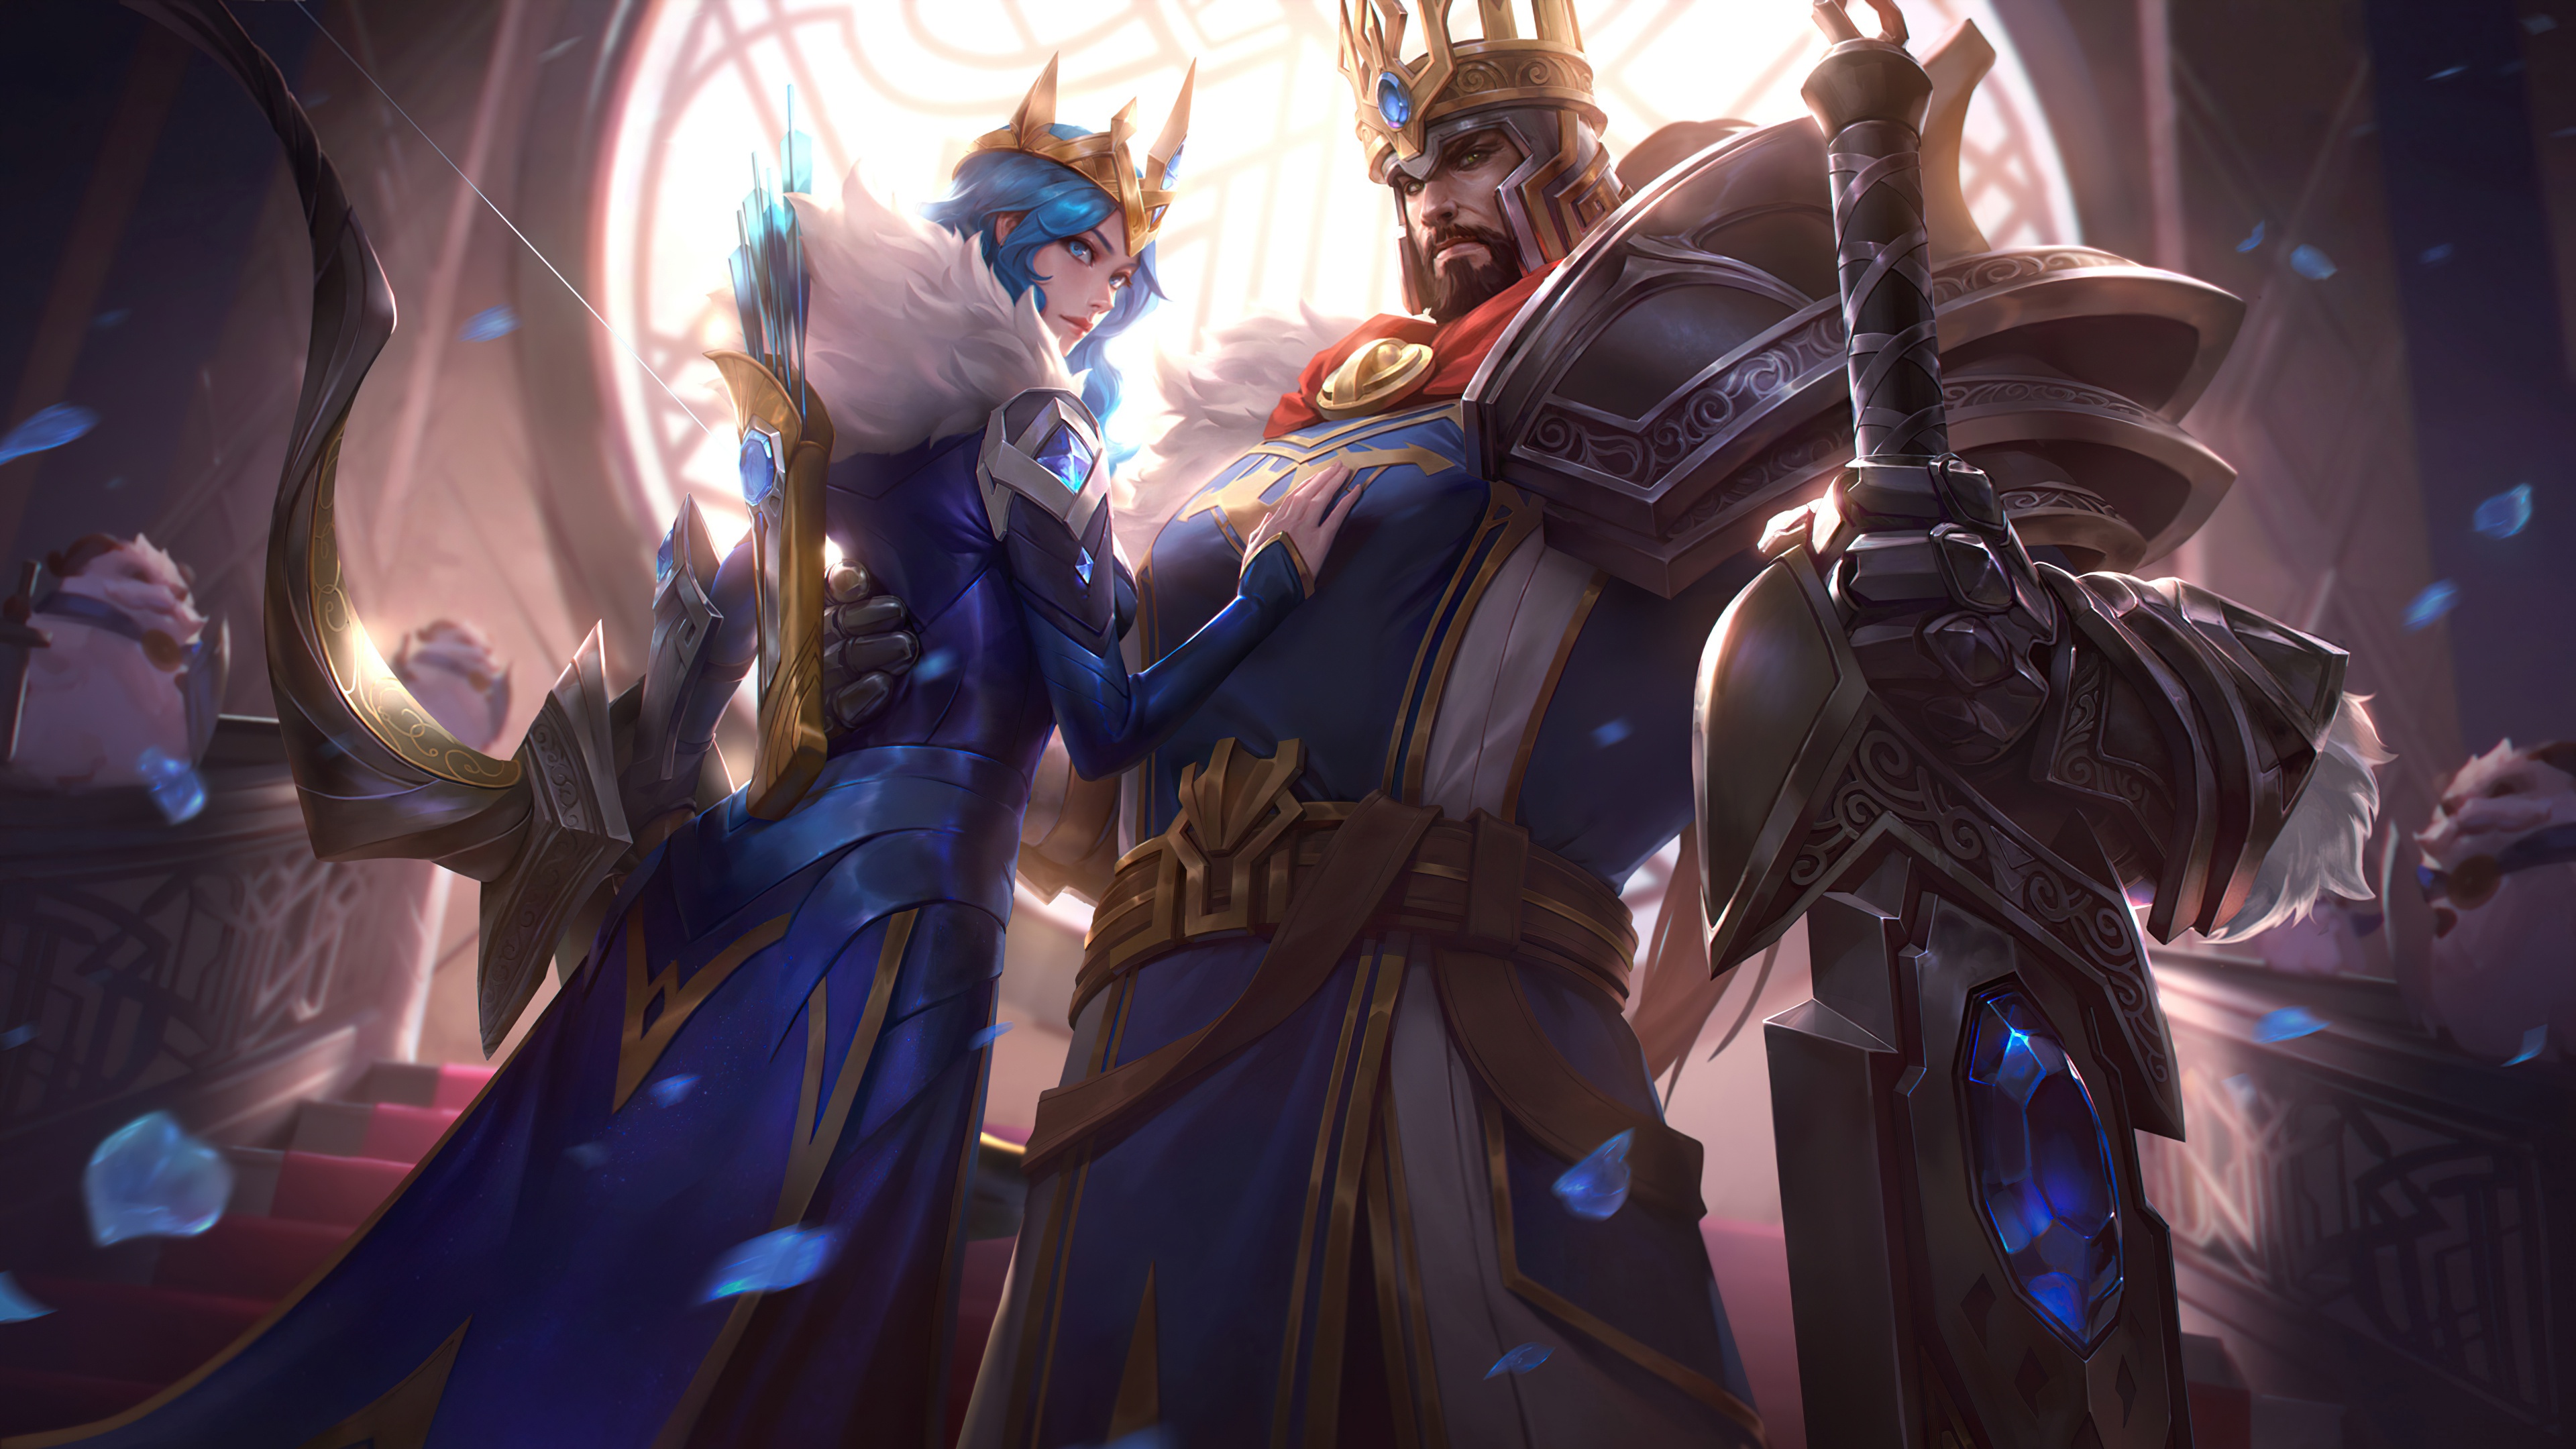 league of legends, tryndamere (league of legends), video game, armor, ashe (league of legends), blue eyes, crown, sword, weapon